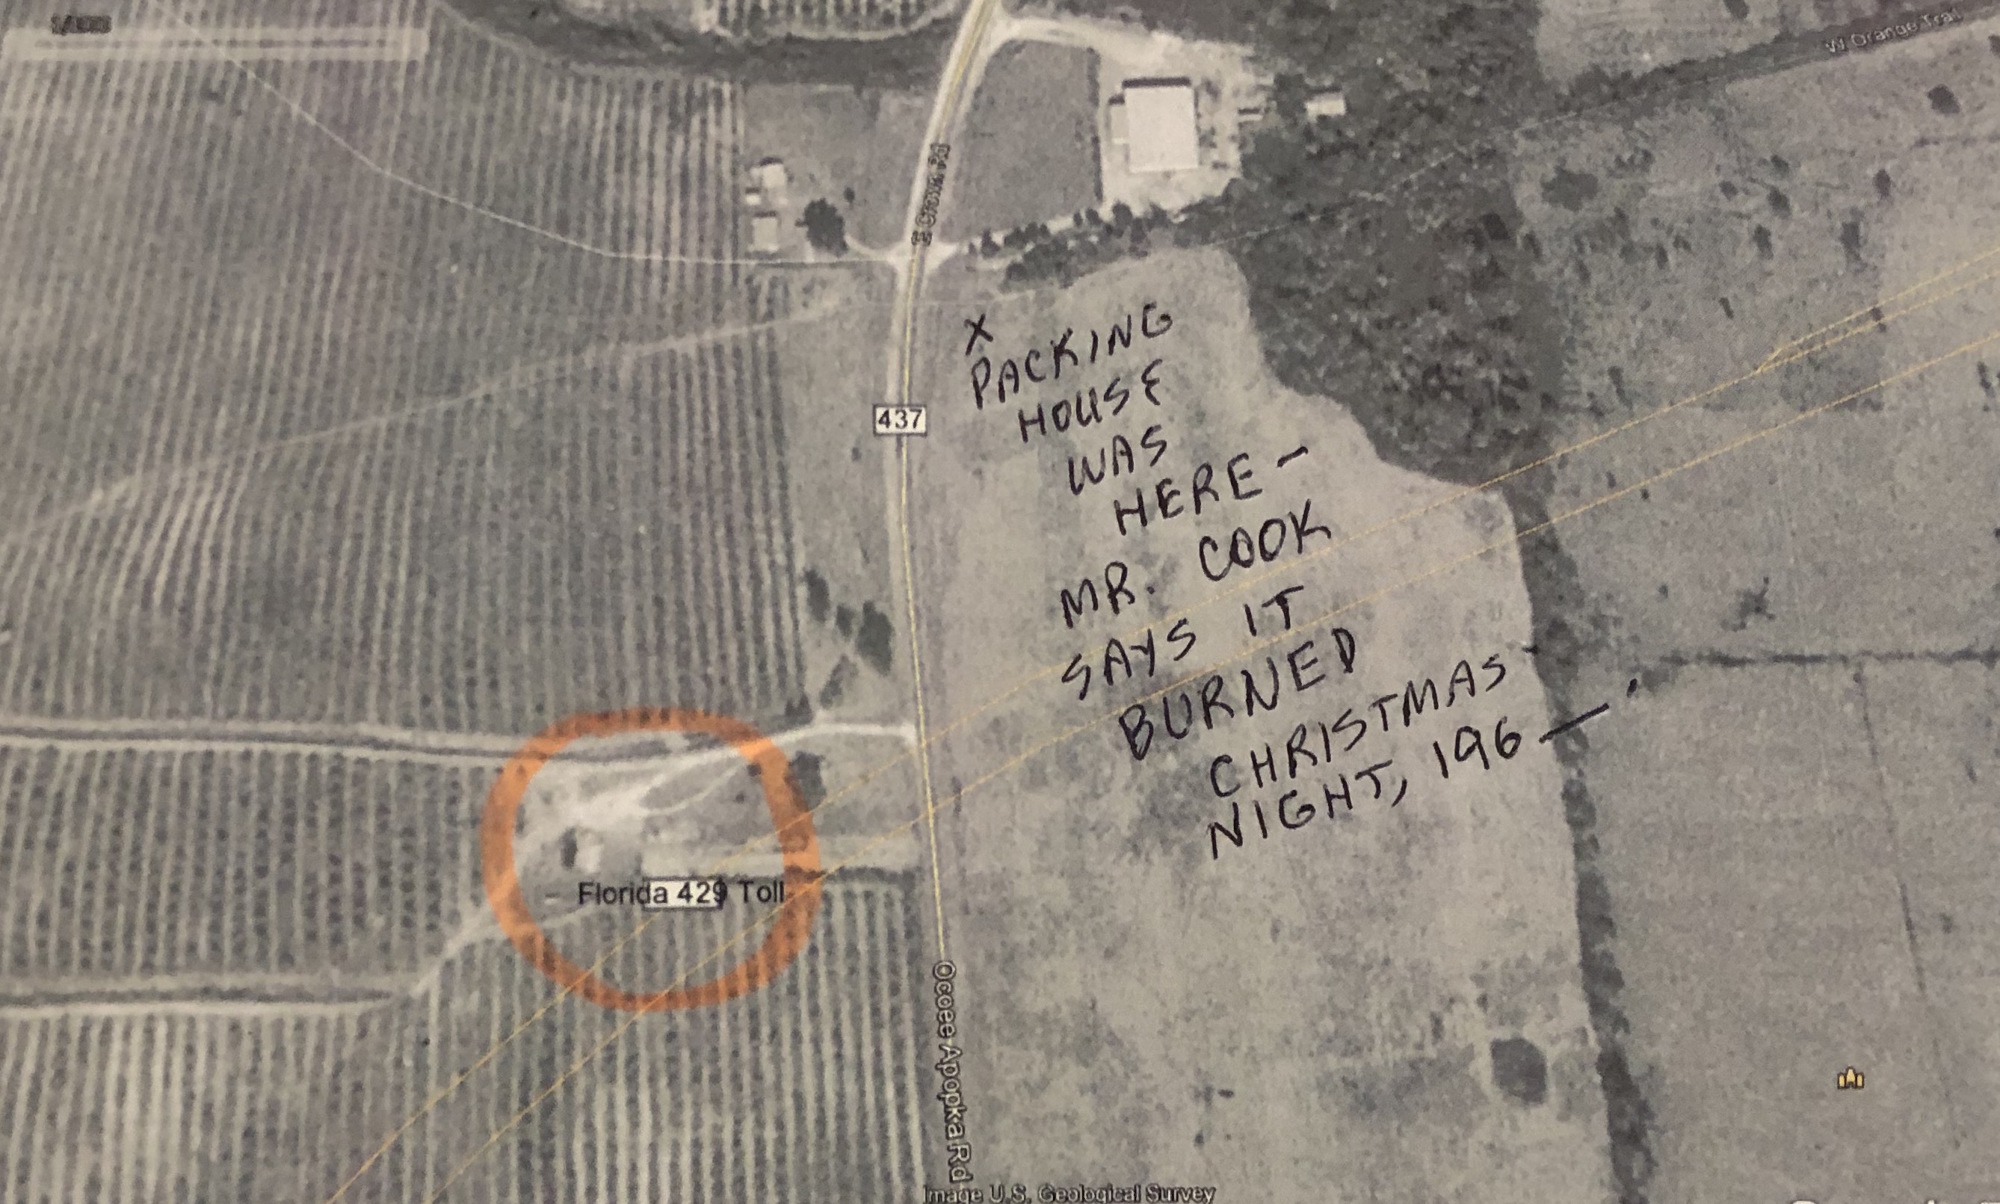 An aerial photo shows the location of John T. Fuller’s packing house on Ocoee-Apopka Road.